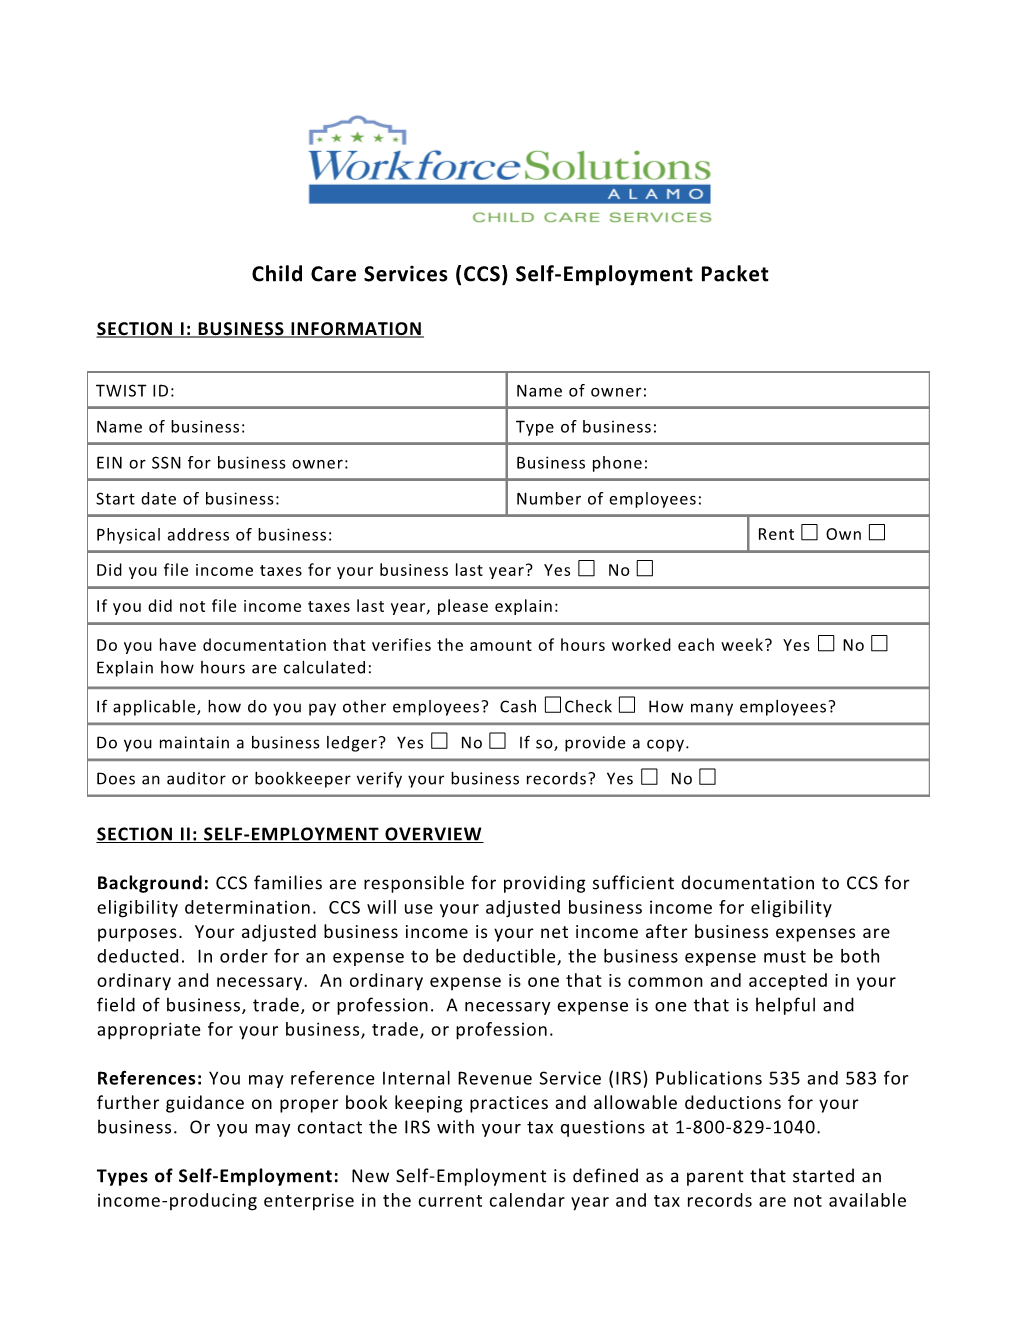 Child Care Services (CCS) Self-Employment Packet